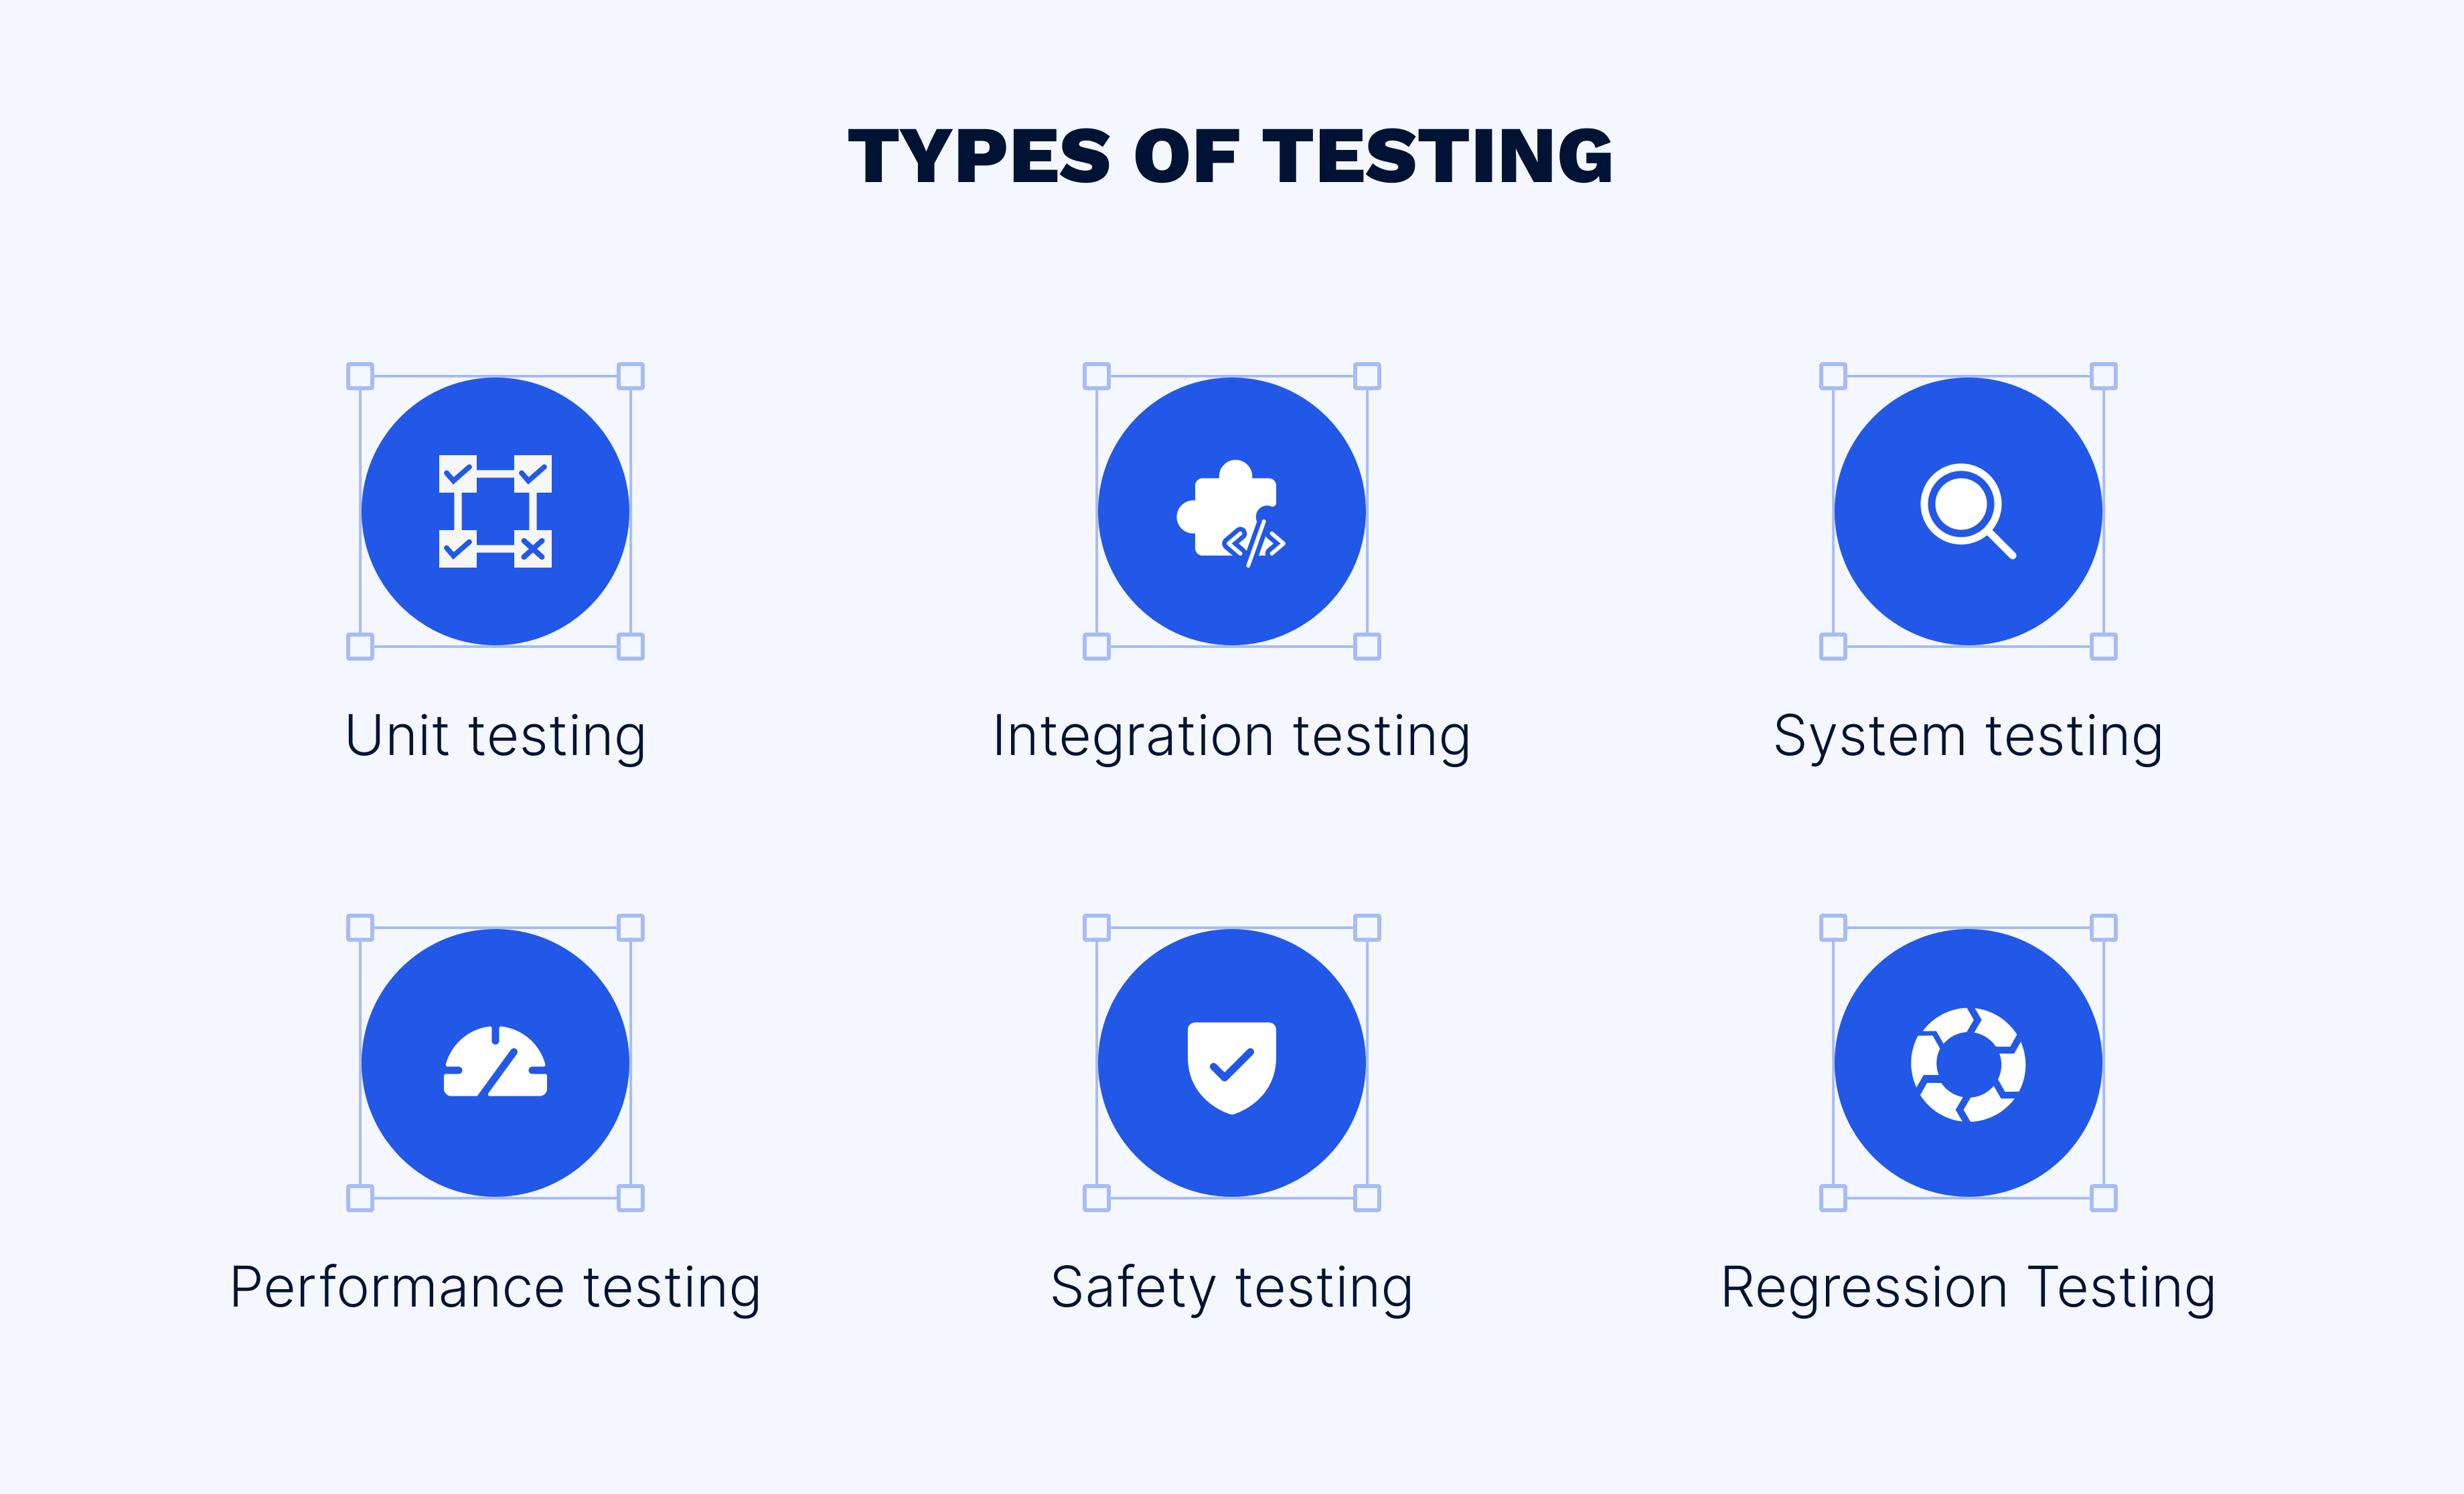 Types of medical software testing